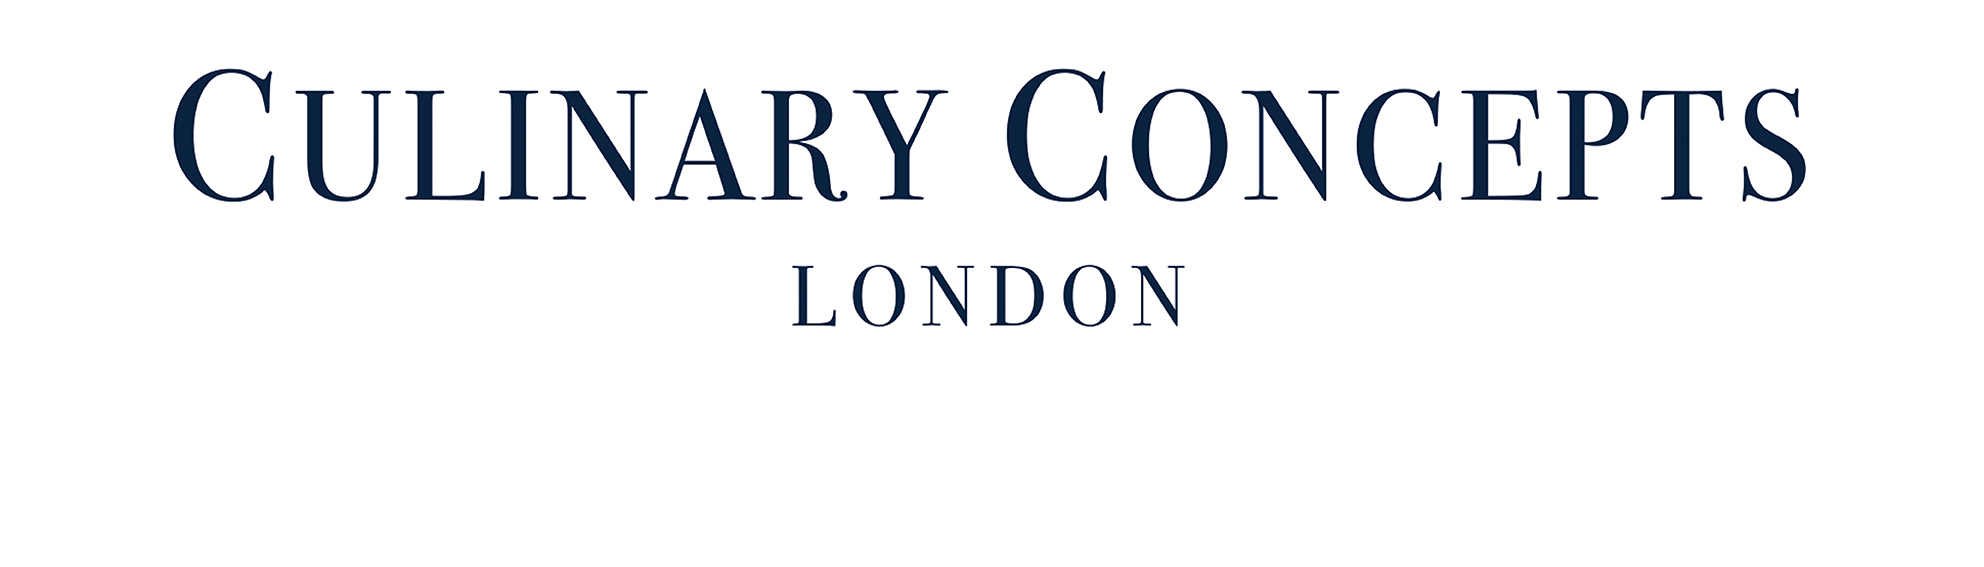 Culinary Concepts London